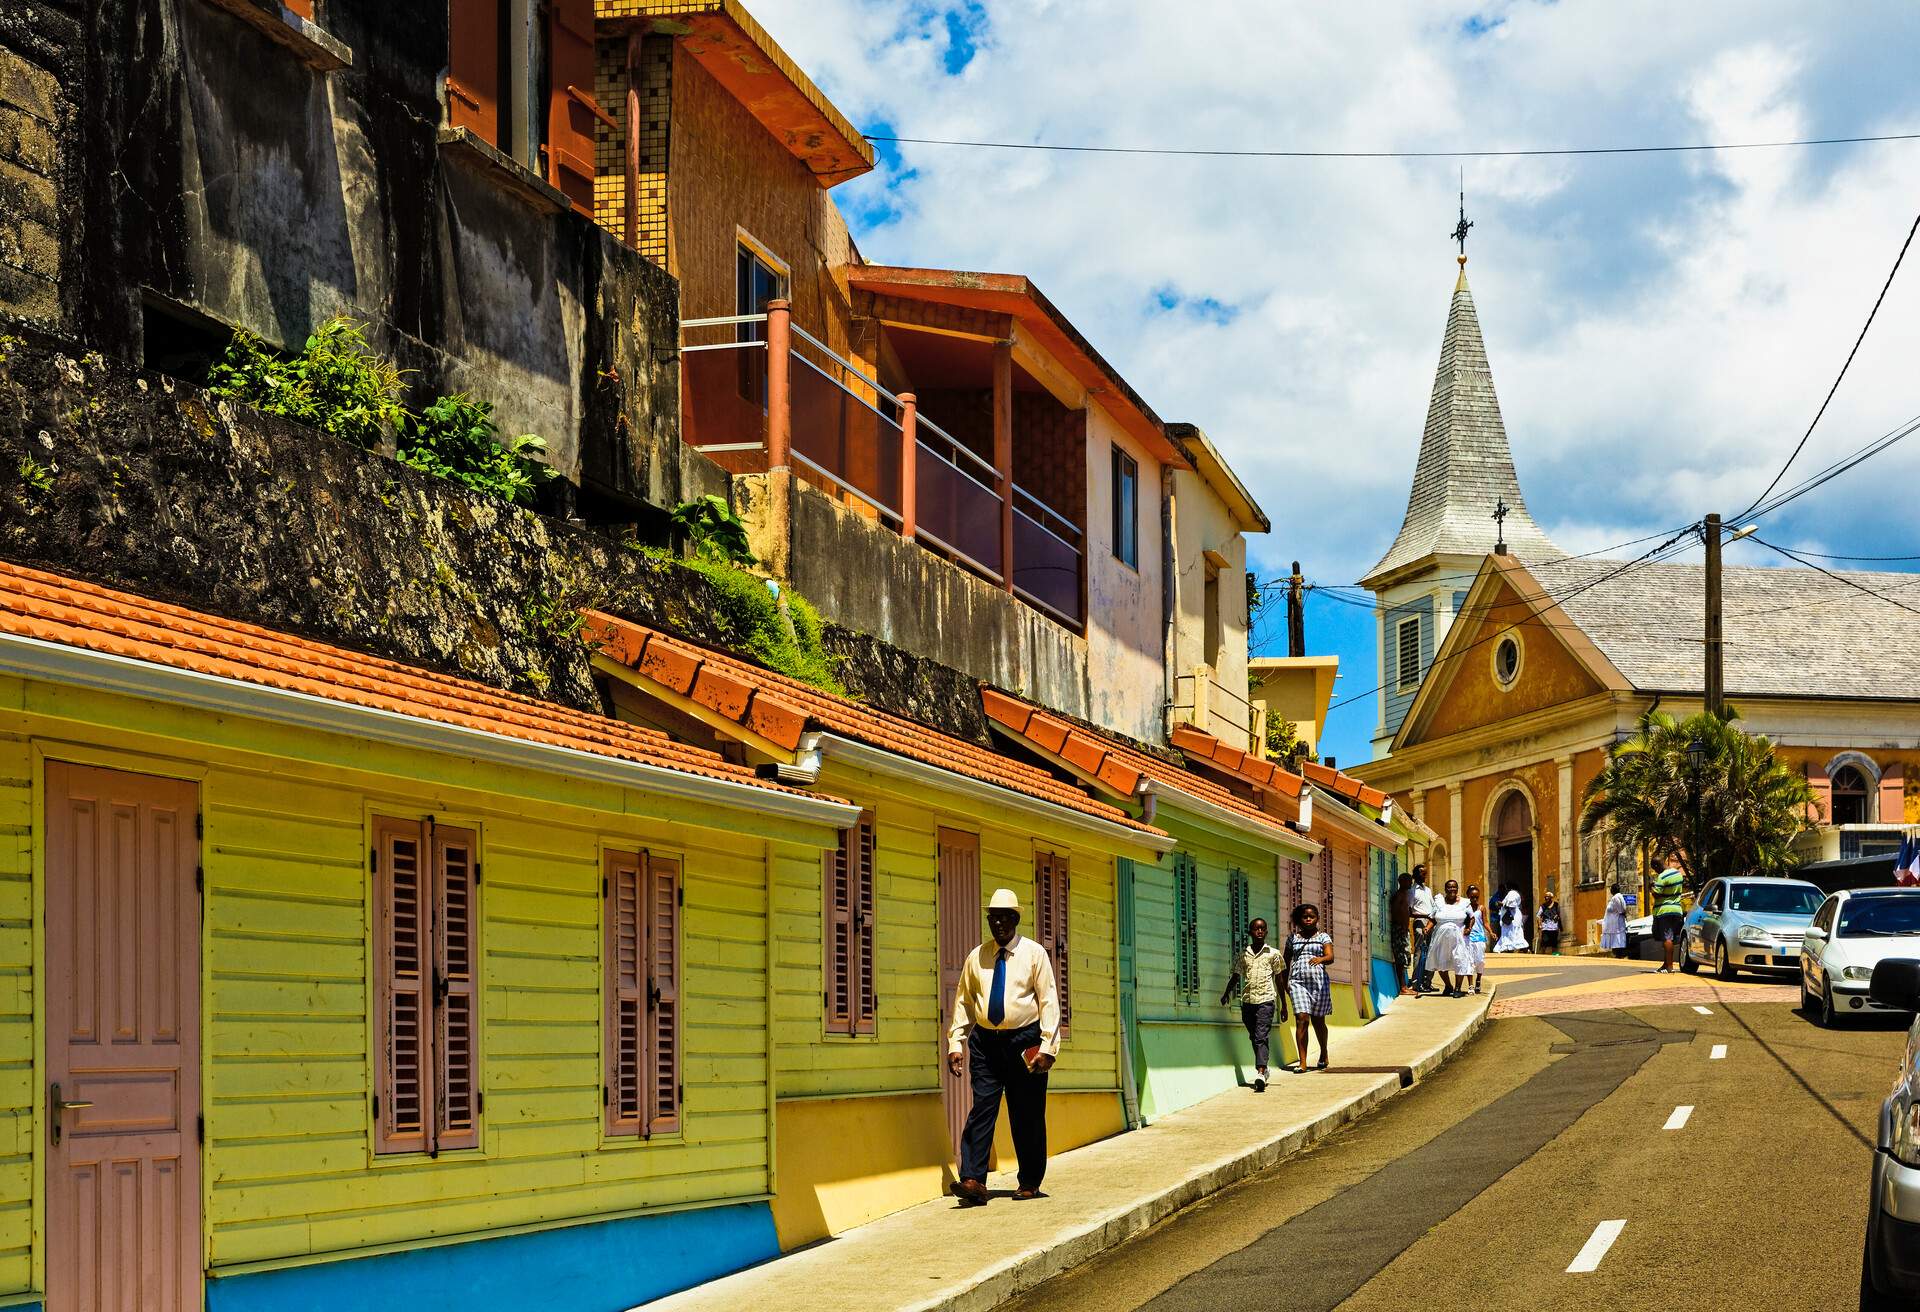 DEST_MARTINIQUE_SAINTE-CATHERINE-D'ALEXANDRIE-CHURCH_TRADITIONAL-WOODEN-HOUSES_GettyImages-184789340